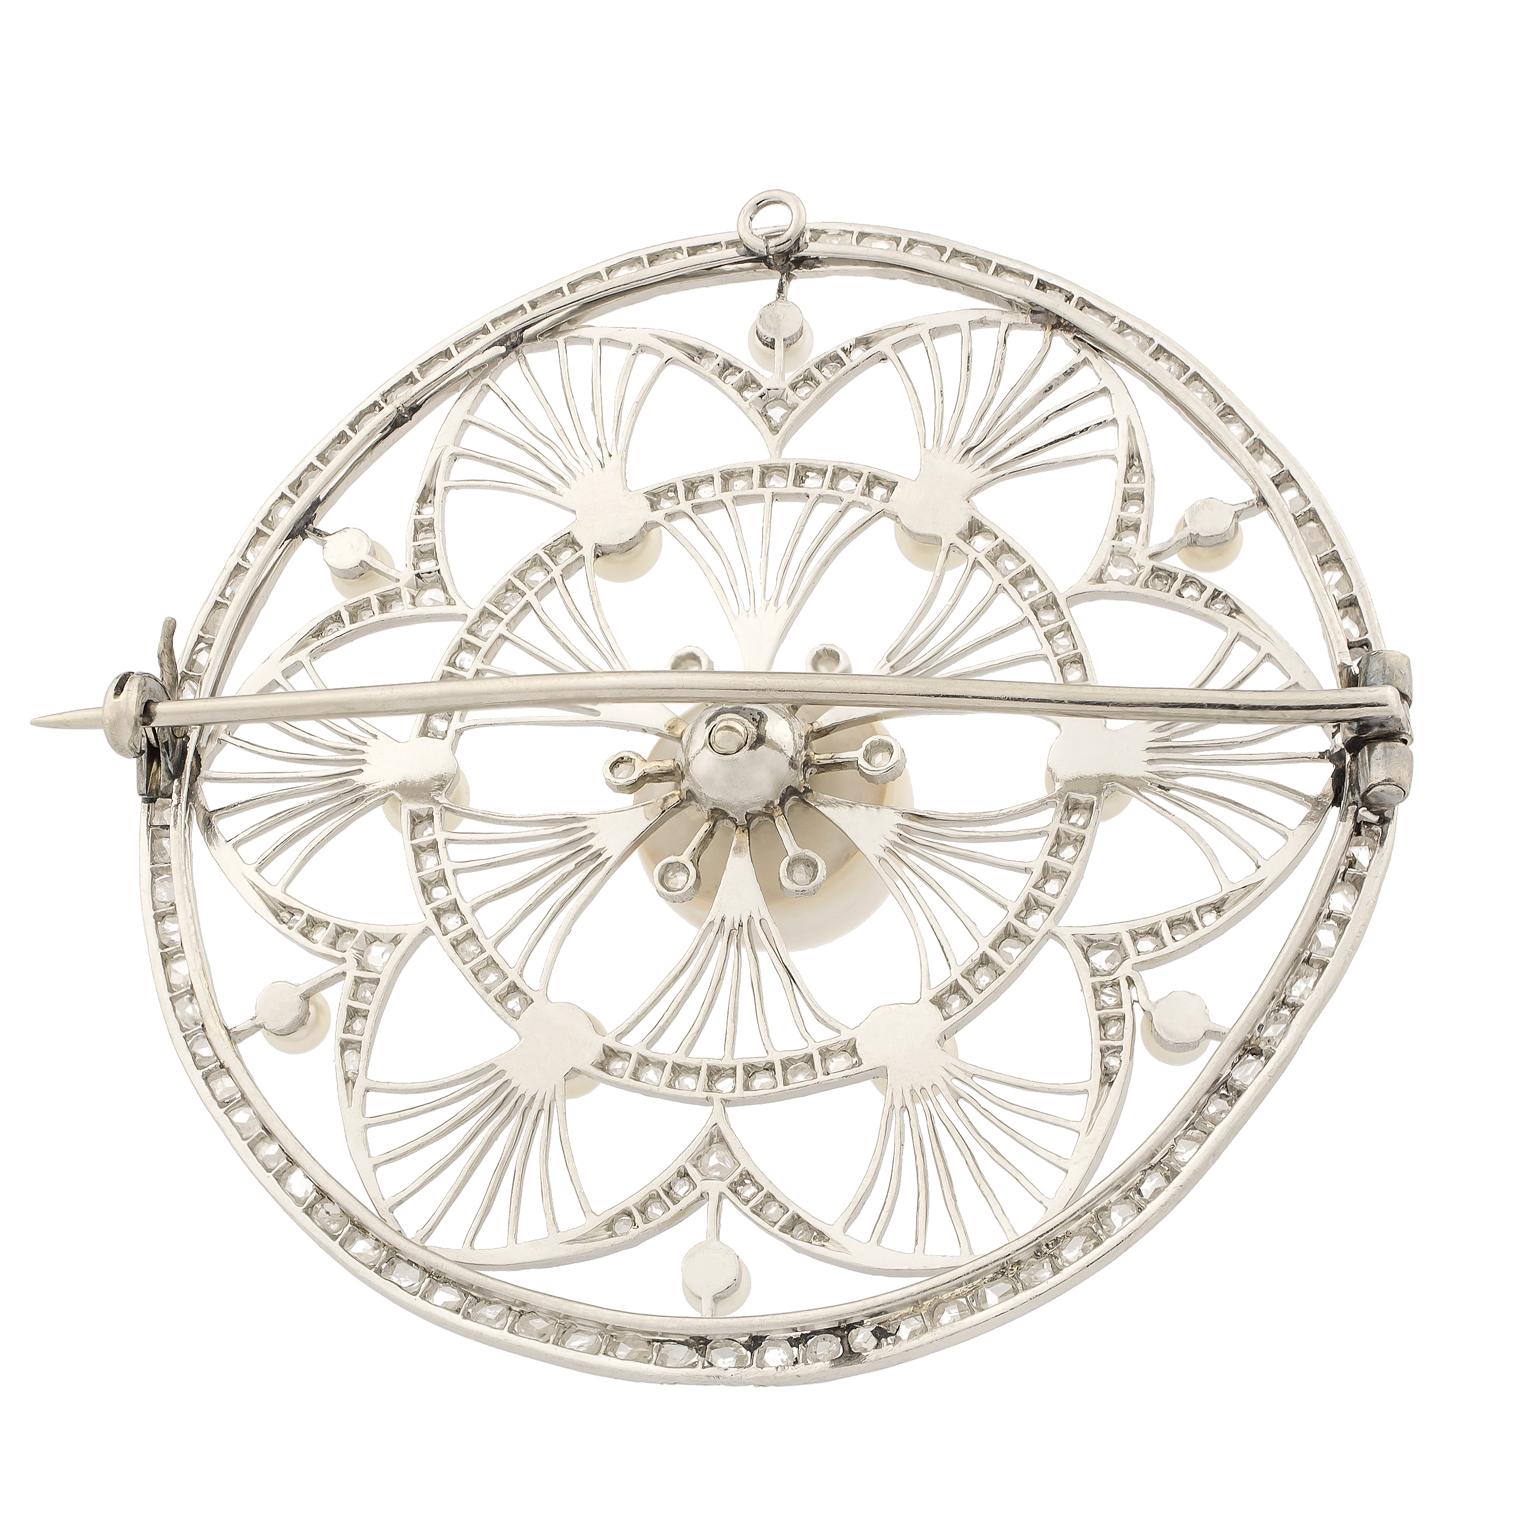 Circular Belle Époque platinum brooch with a central natural pearl encompassed by pearls and rose cut diamonds